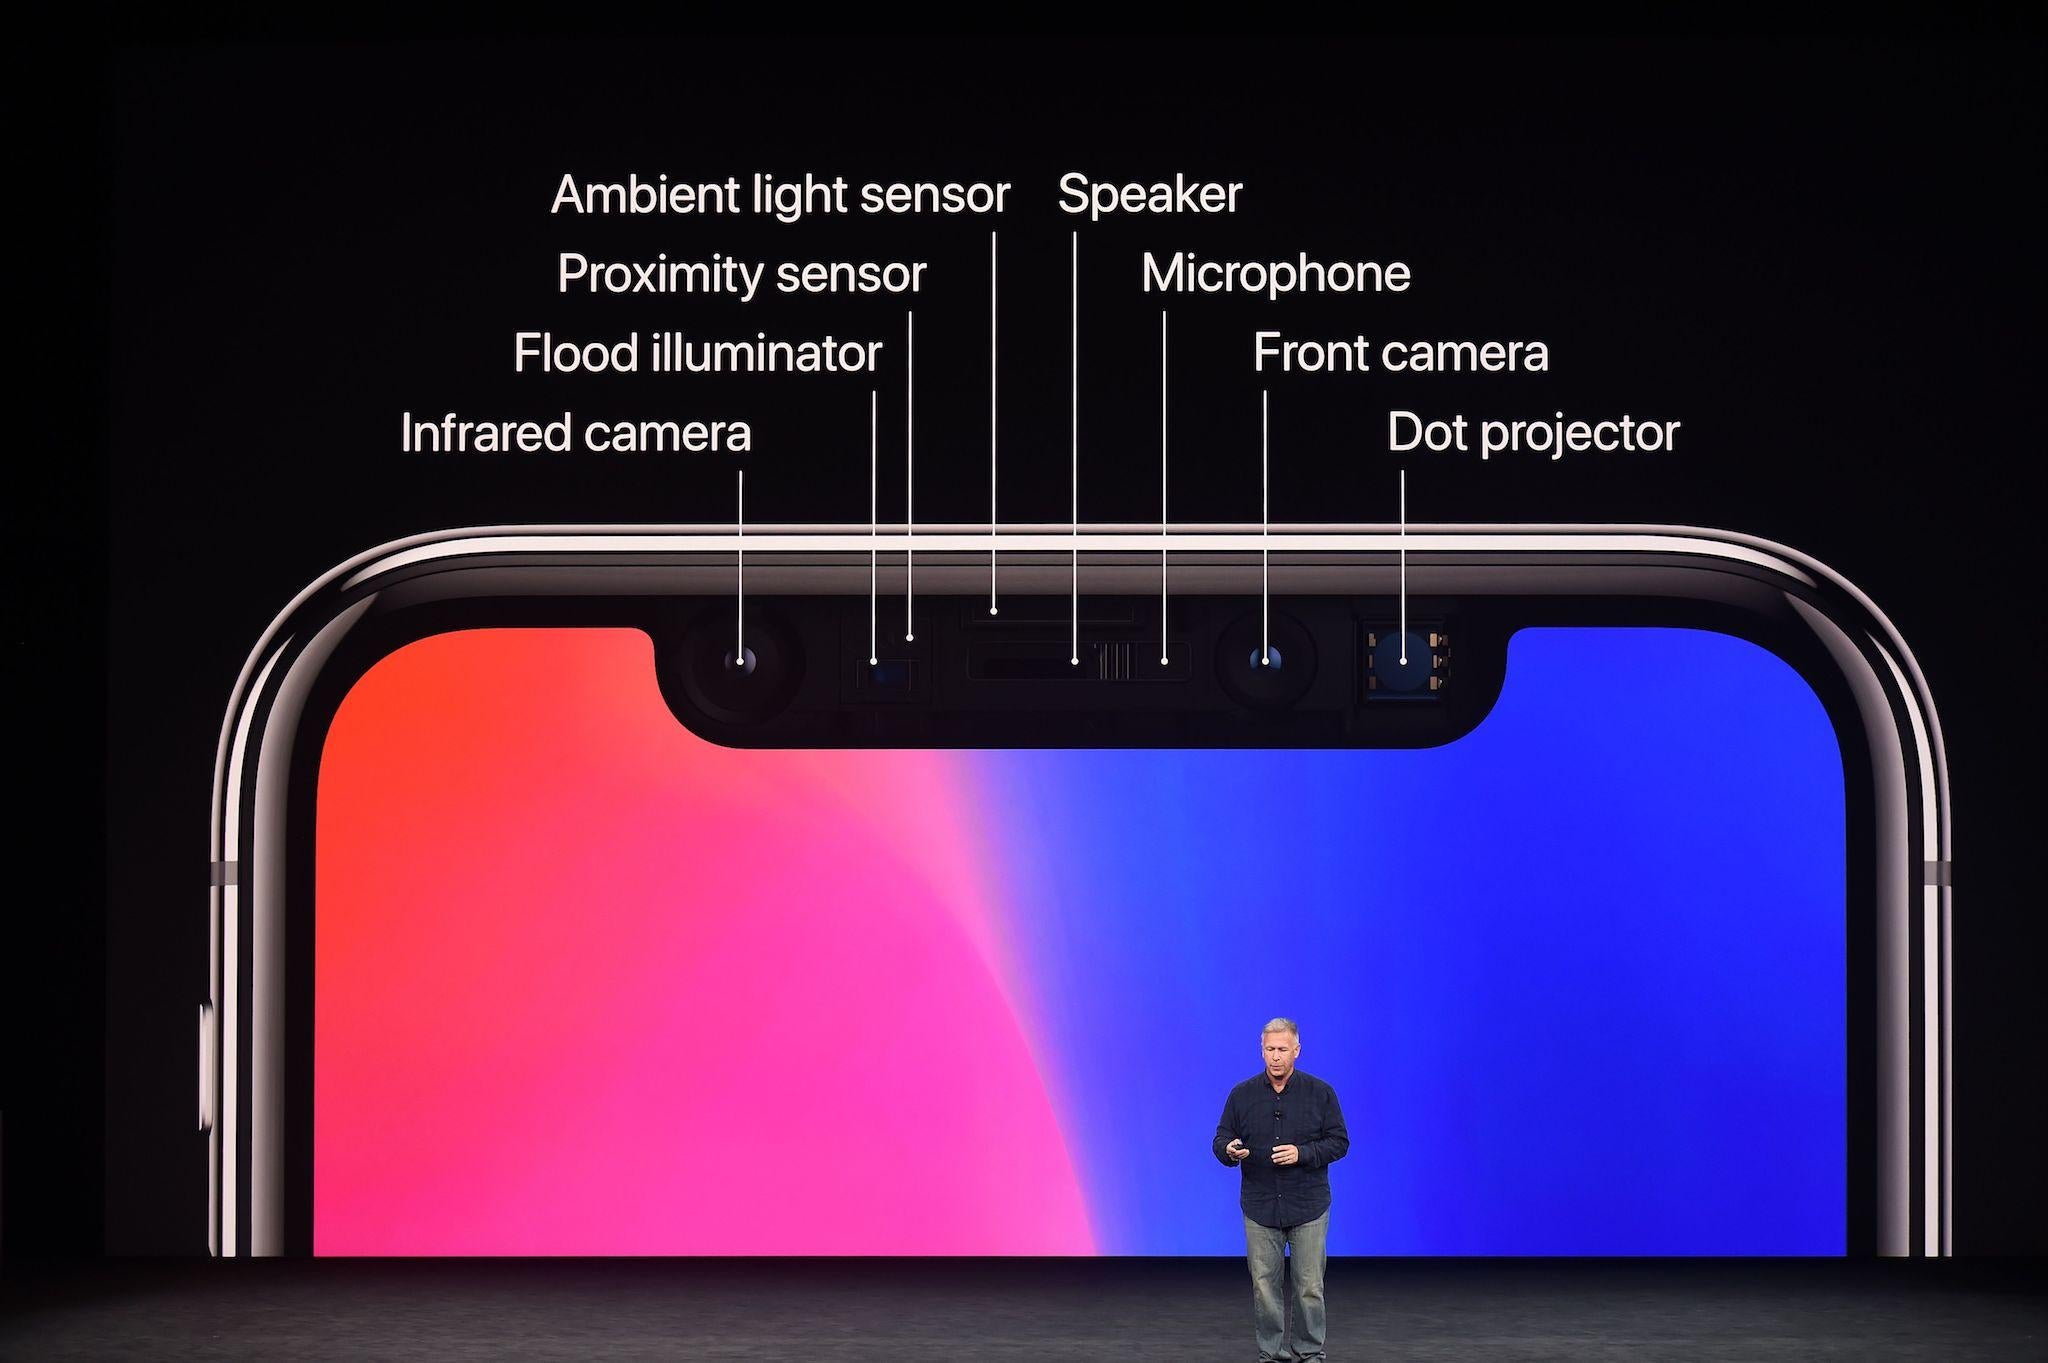 Senior Vice President of Worldwide Marketing at Apple, Philip Schiller, introduces the iPhone X during a media event at Apple's new headquarters in Cupertino, California on September 12, 2017